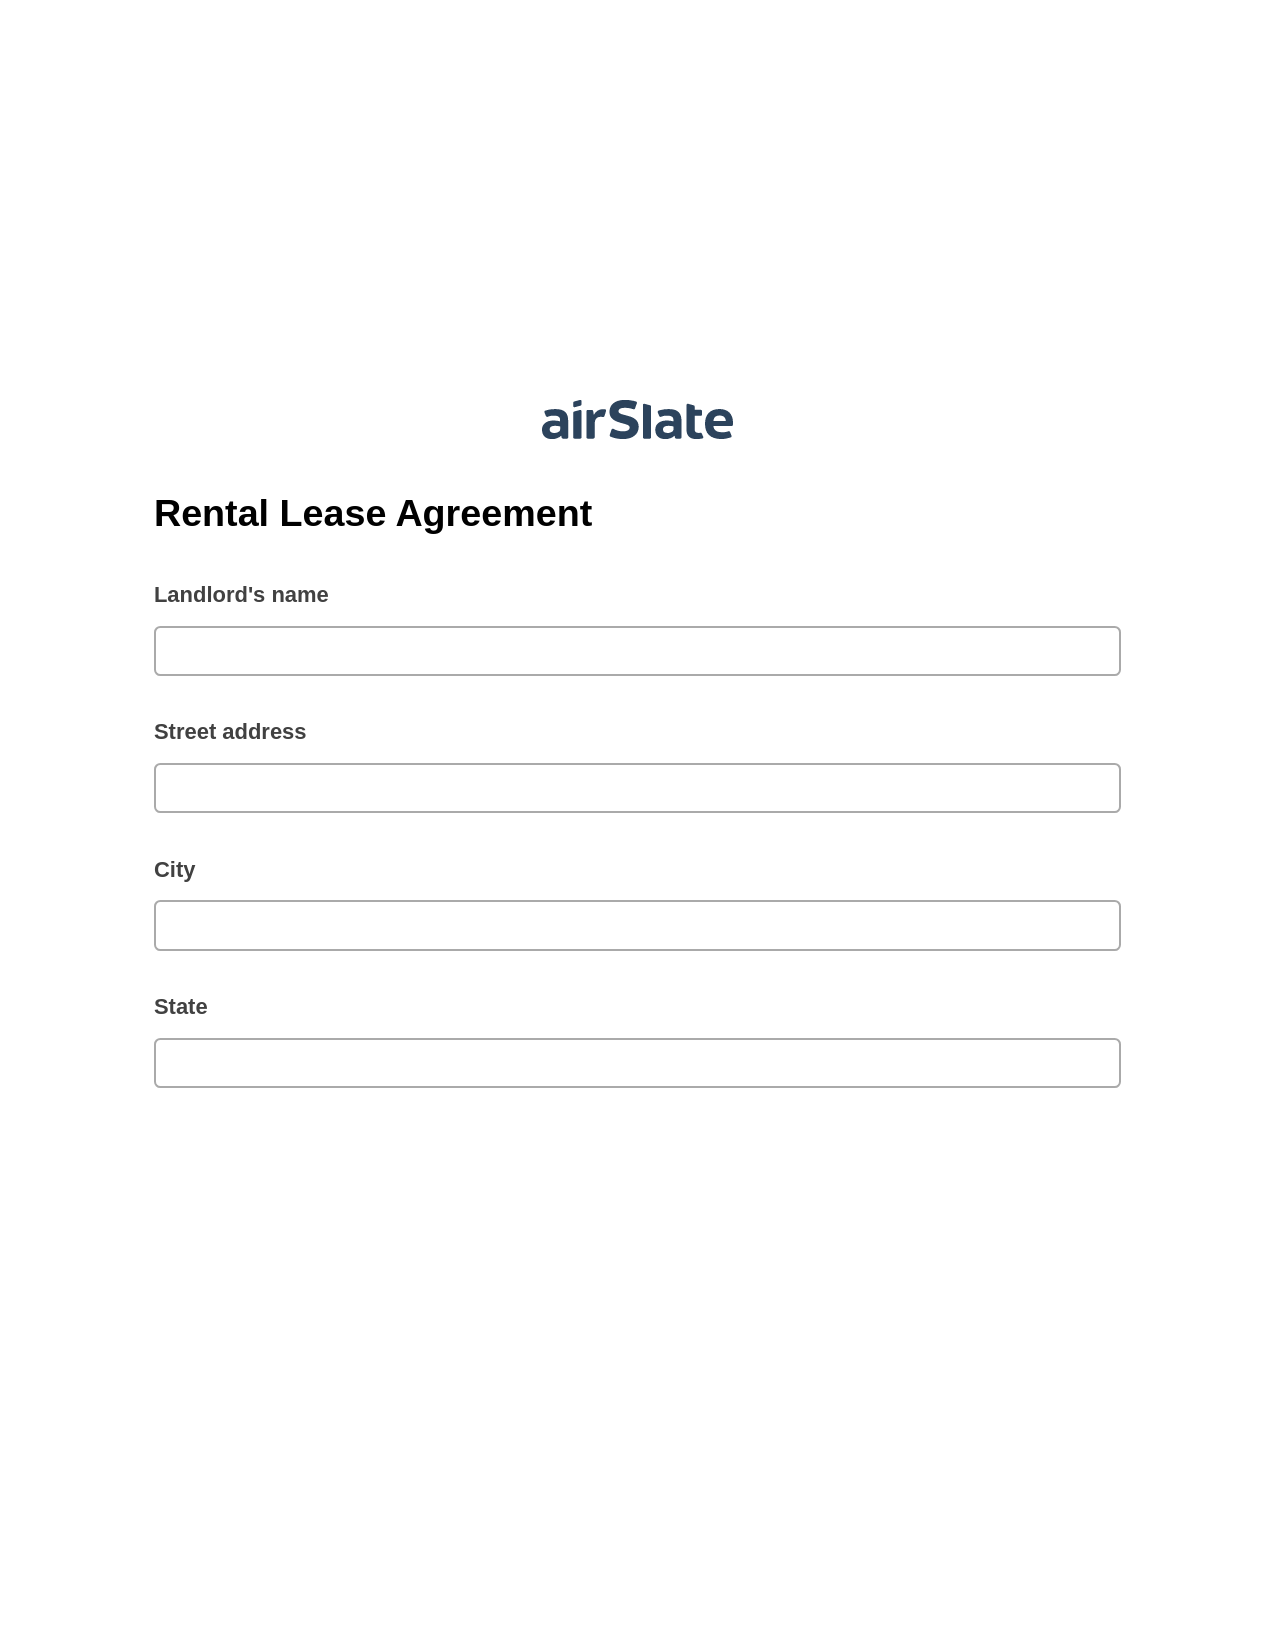 Rental Lease Agreement Pre-fill from MySQL Dropdown Options Bot, Set signature type addon, Post-finish Document Bot